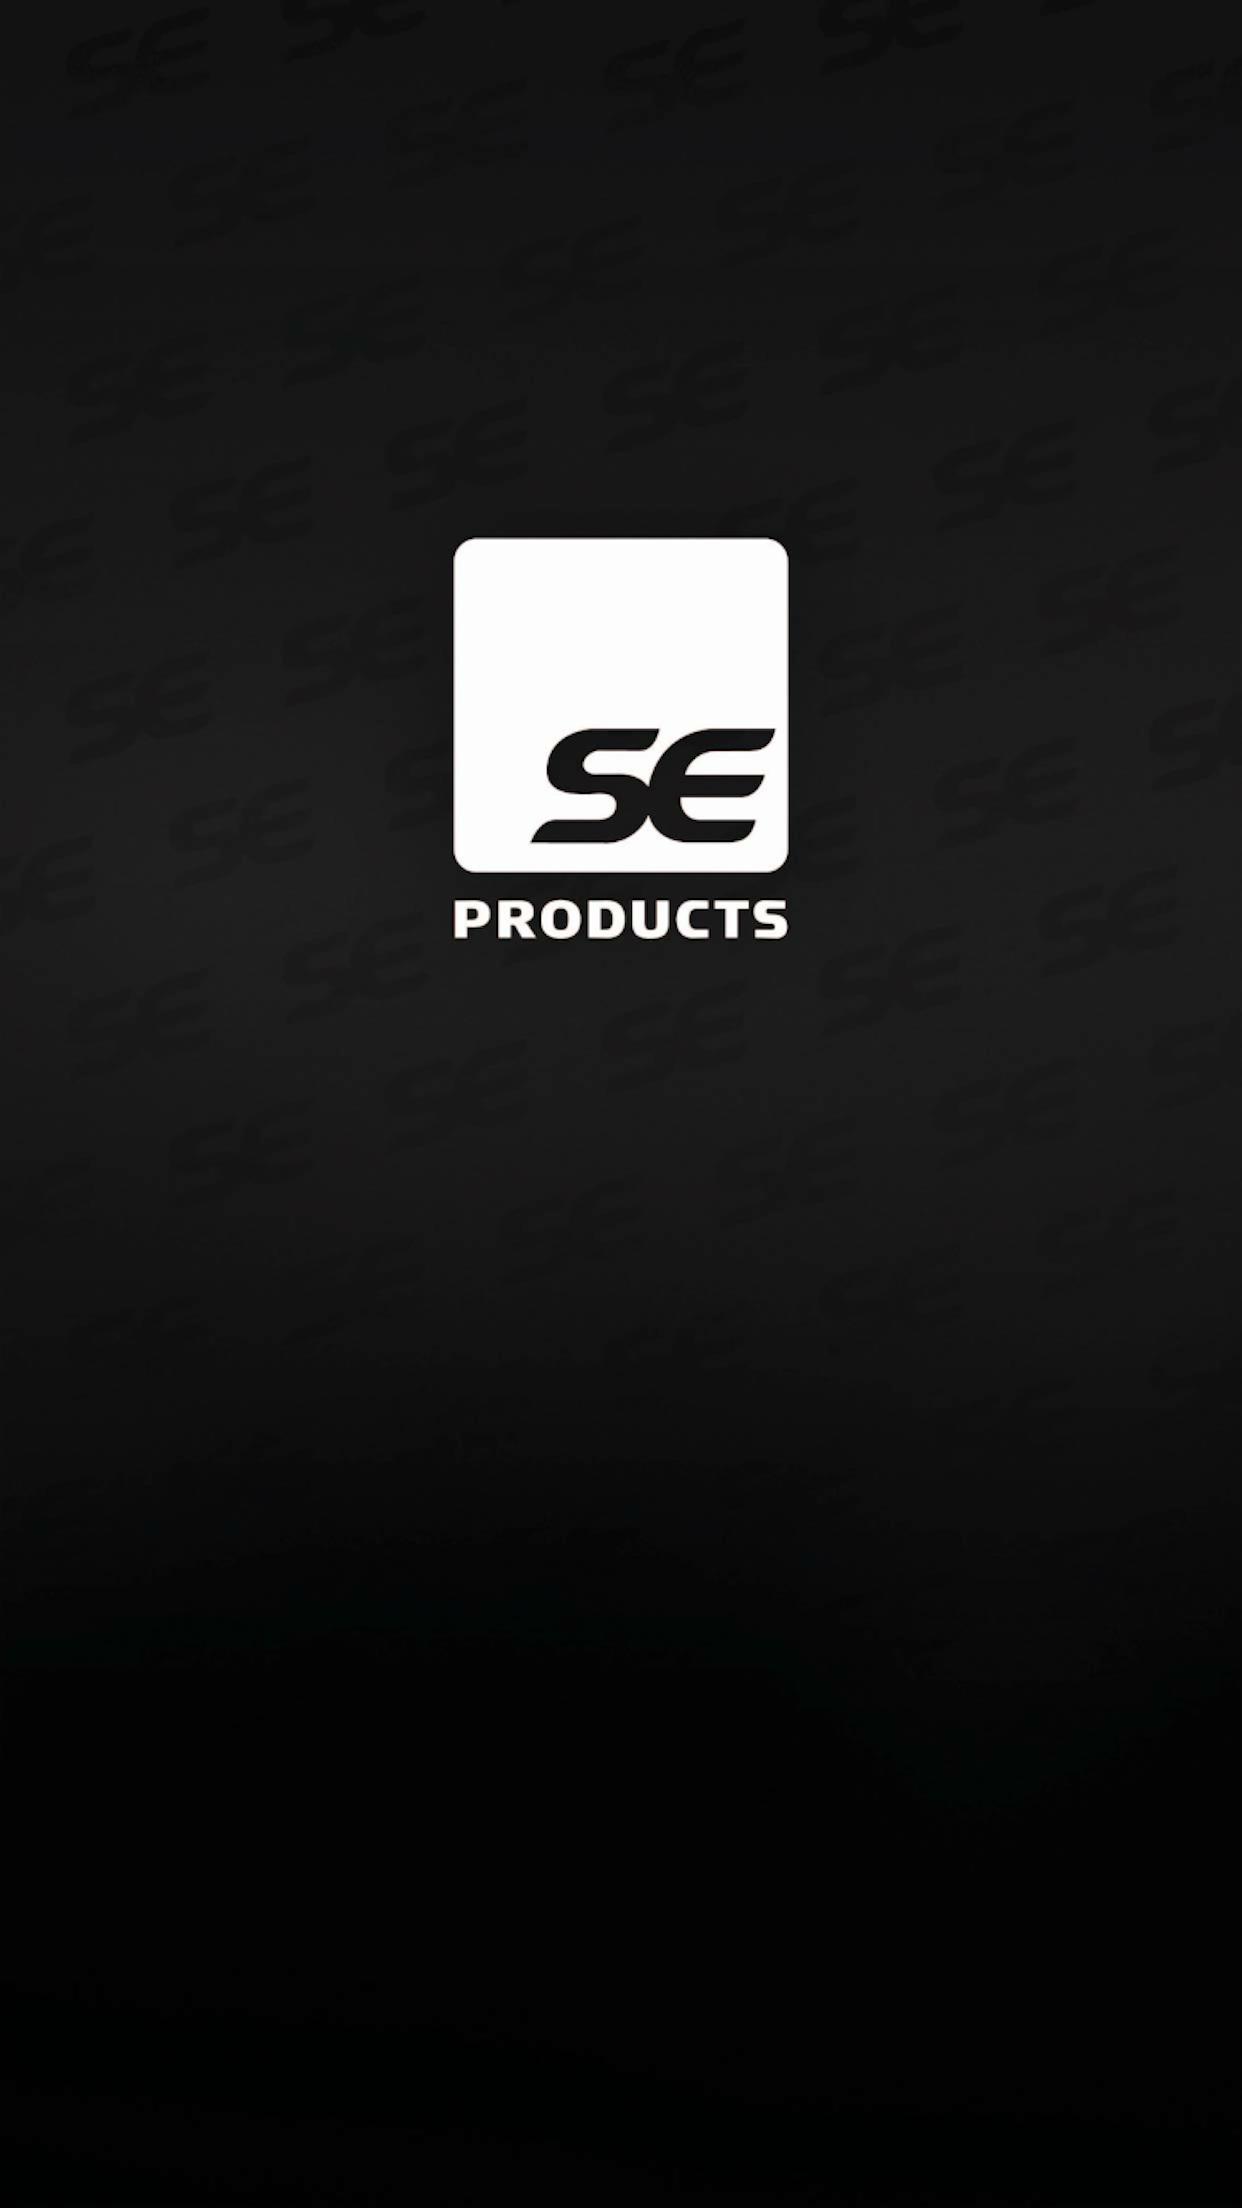 Se products